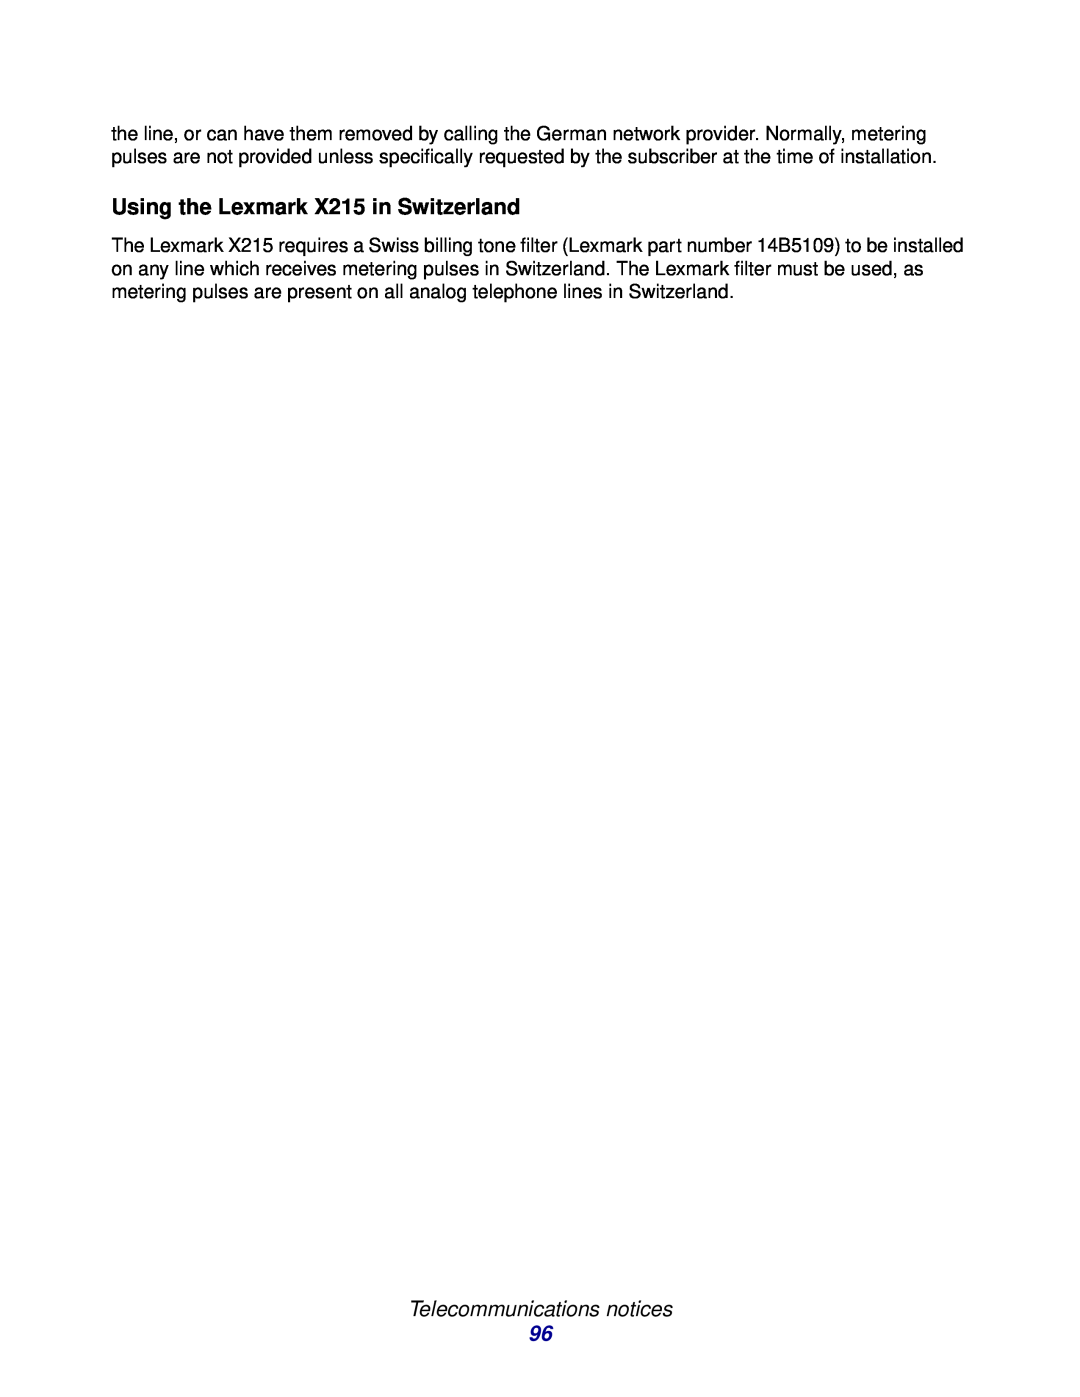 Lexmark X215 MFP manual Using the Lexmark X215 in Switzerland, Telecommunications notices 